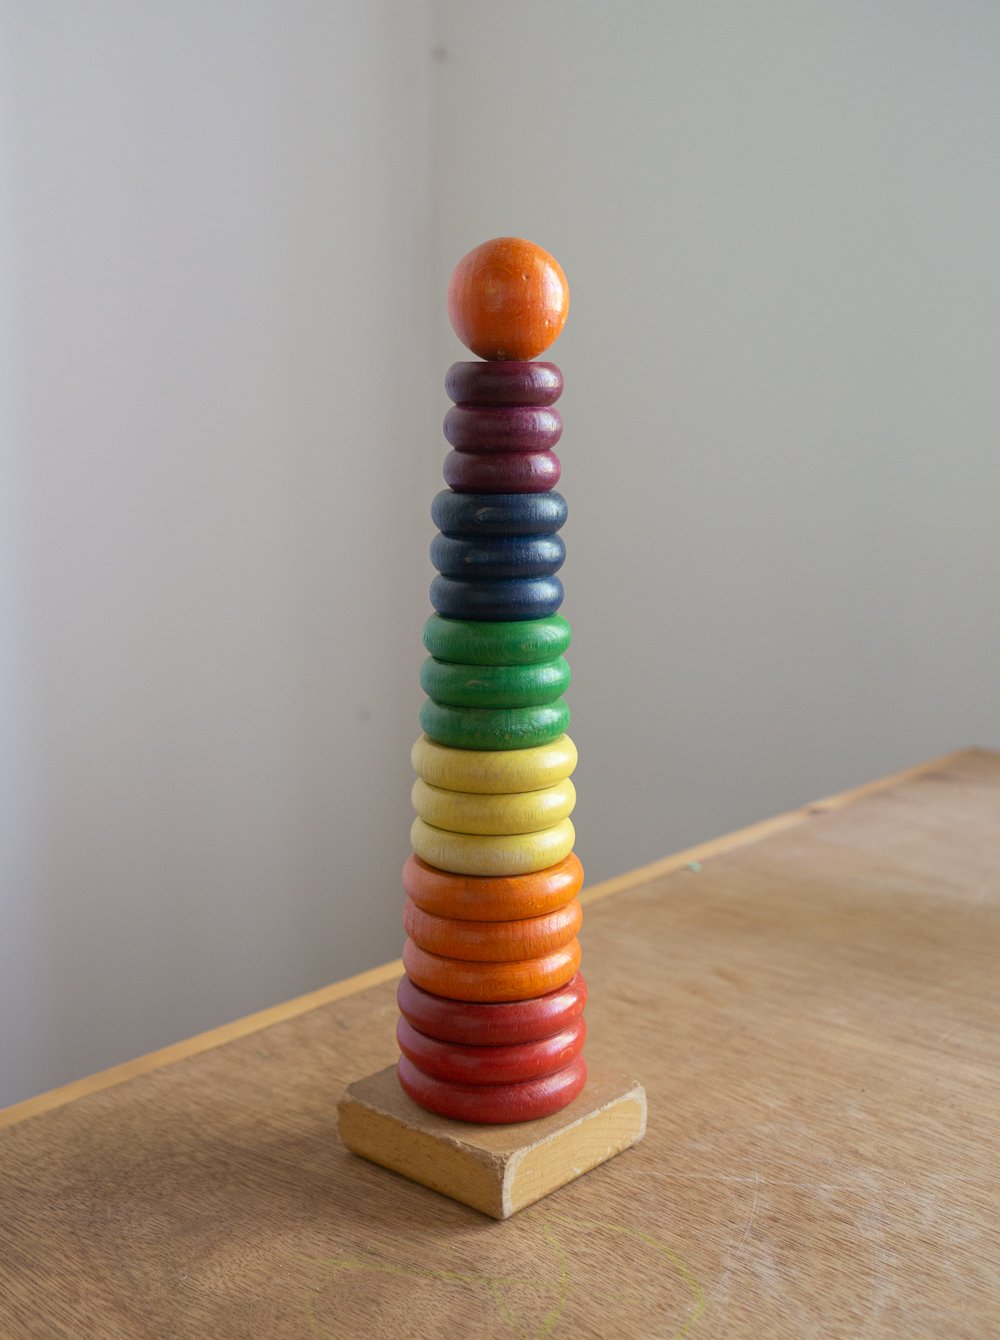 Image of stacking tower